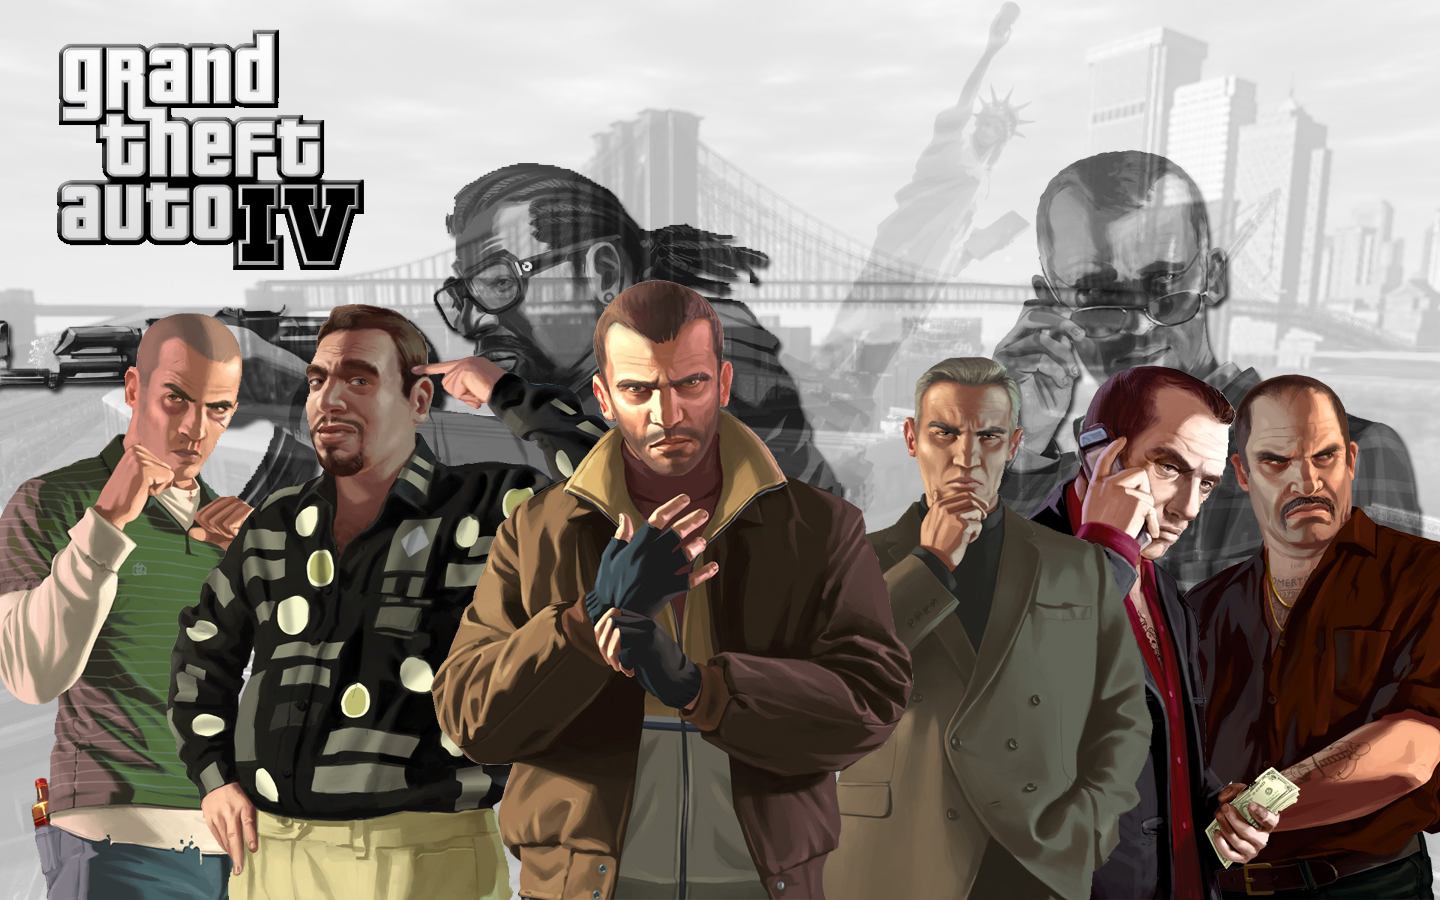 GTA V - Wallpaper for iPhone by BryaaN on DeviantArt